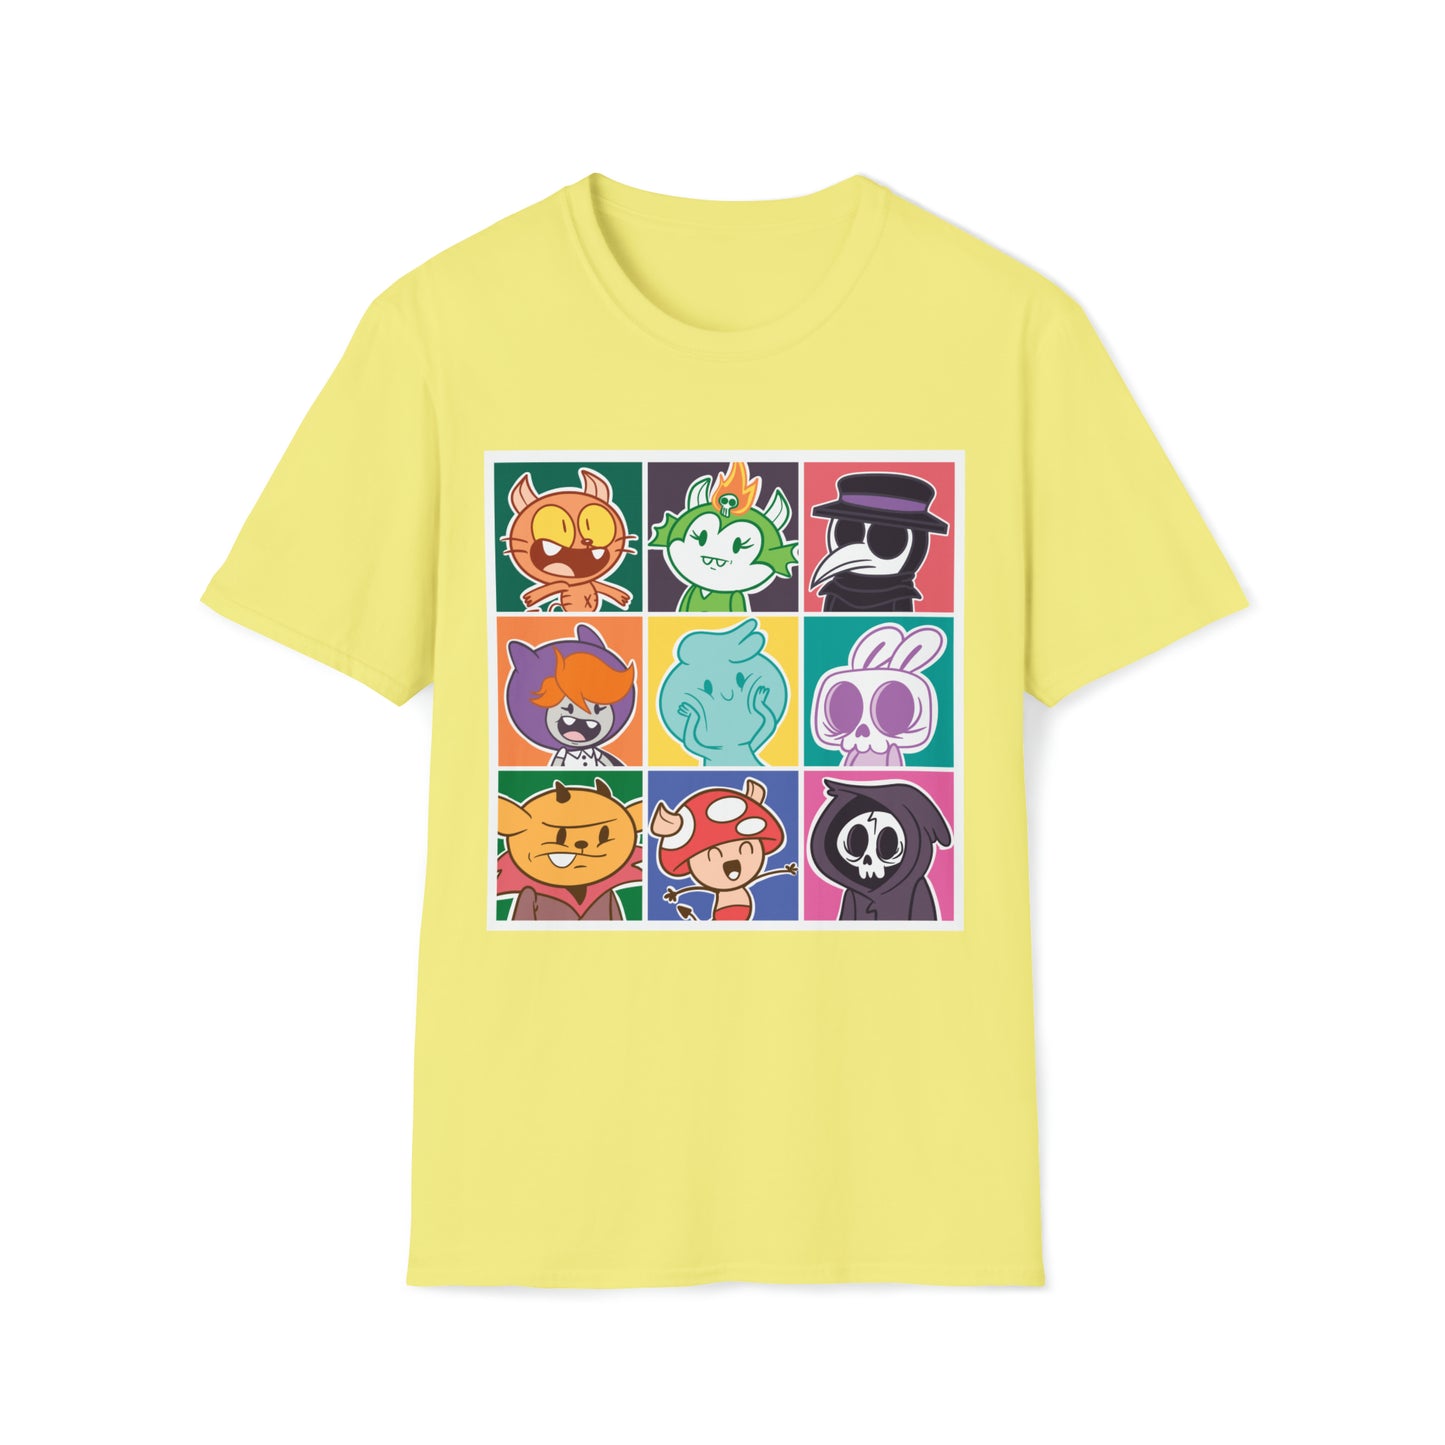 Positively Ghostly Group - Unisex Softstyle T-Shirt